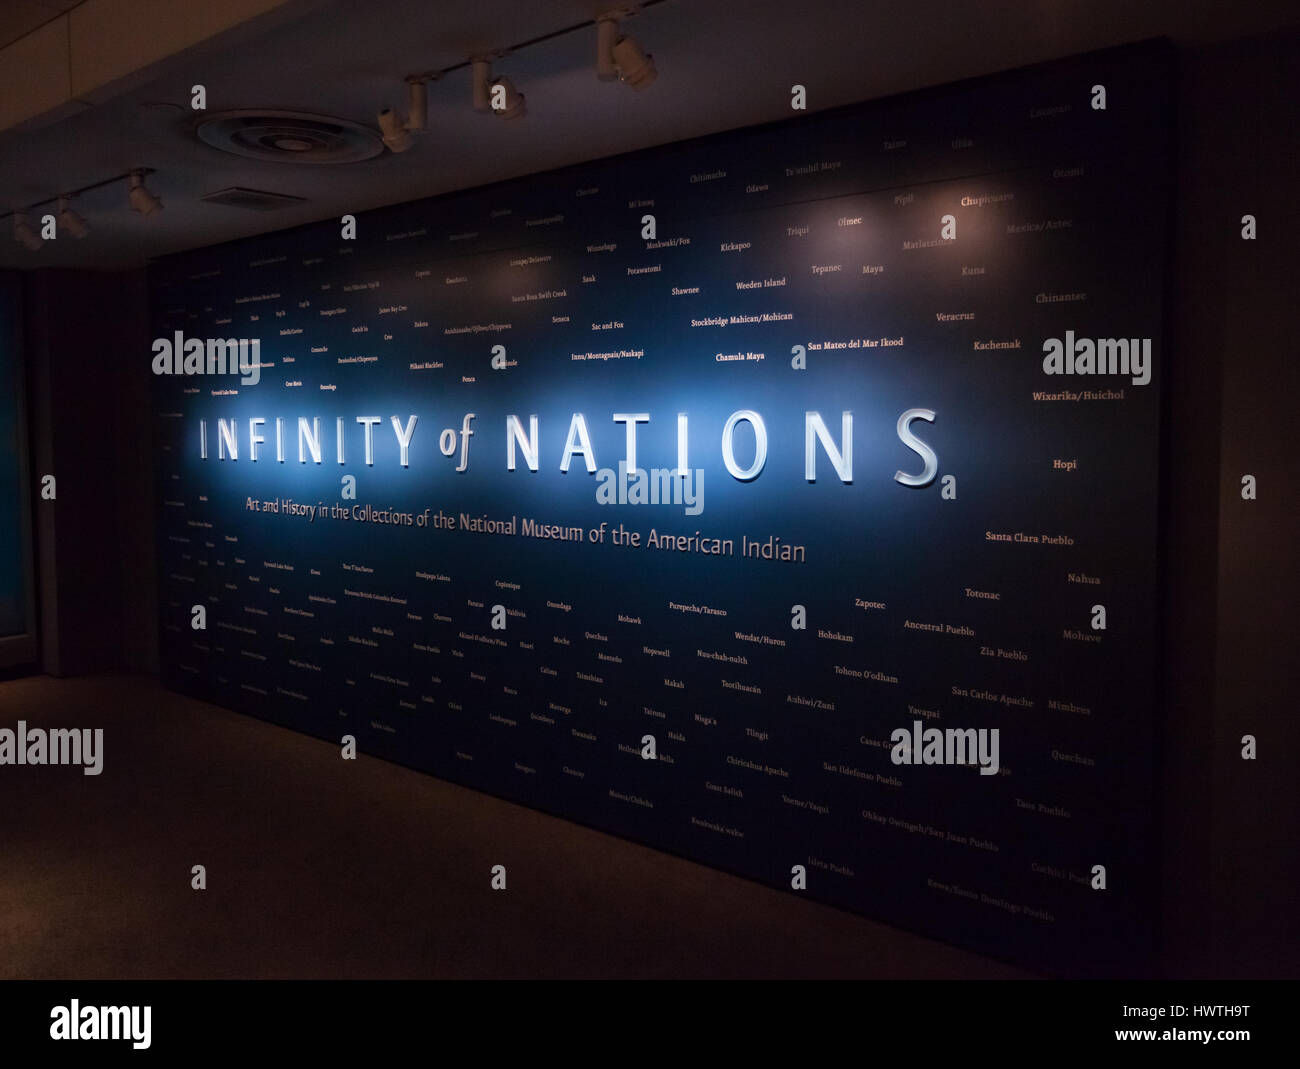 New York City, Usa - July 08, 2015: Infinity of Nations, Art and History in the Collections of the National Museum of the American Indian. Stock Photo